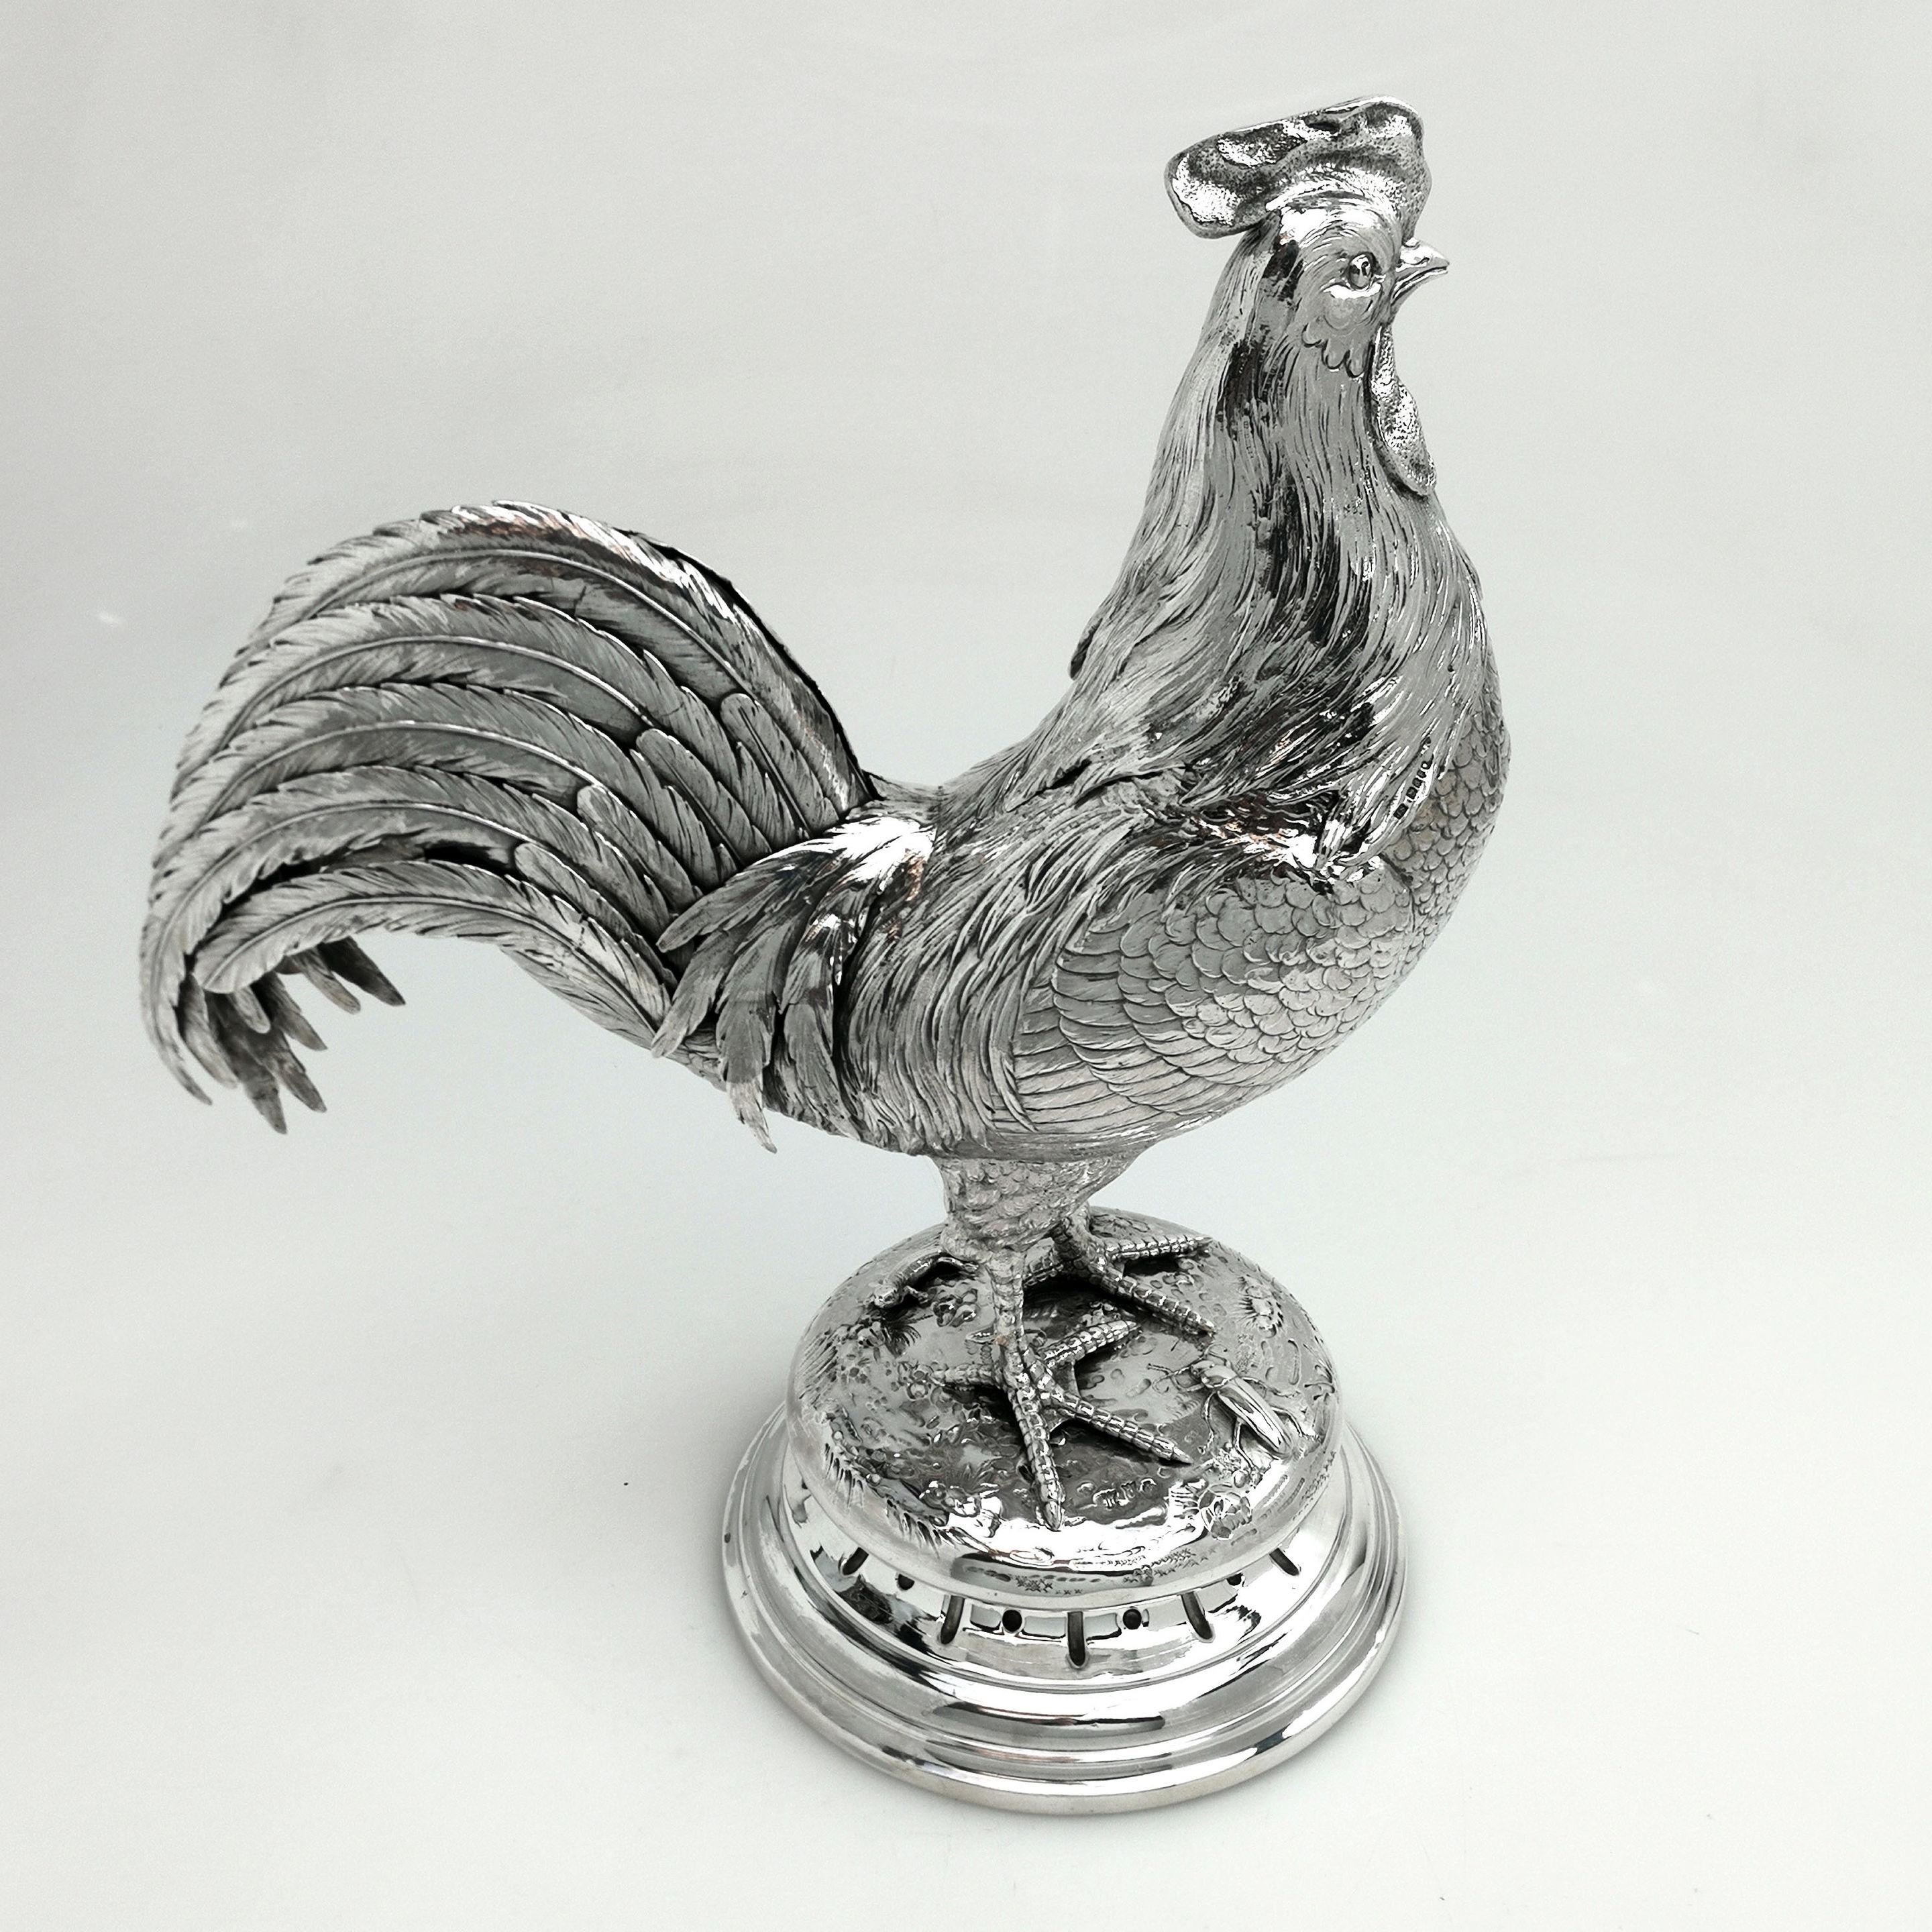 A magnificent antique German sterling Silver Rooster / Cock Figure. This Cockerel stands proudly on a solid silver base with a little lizard and an insect at its feet. The Rooster has impressive tail feathers and is modelled with an excellent